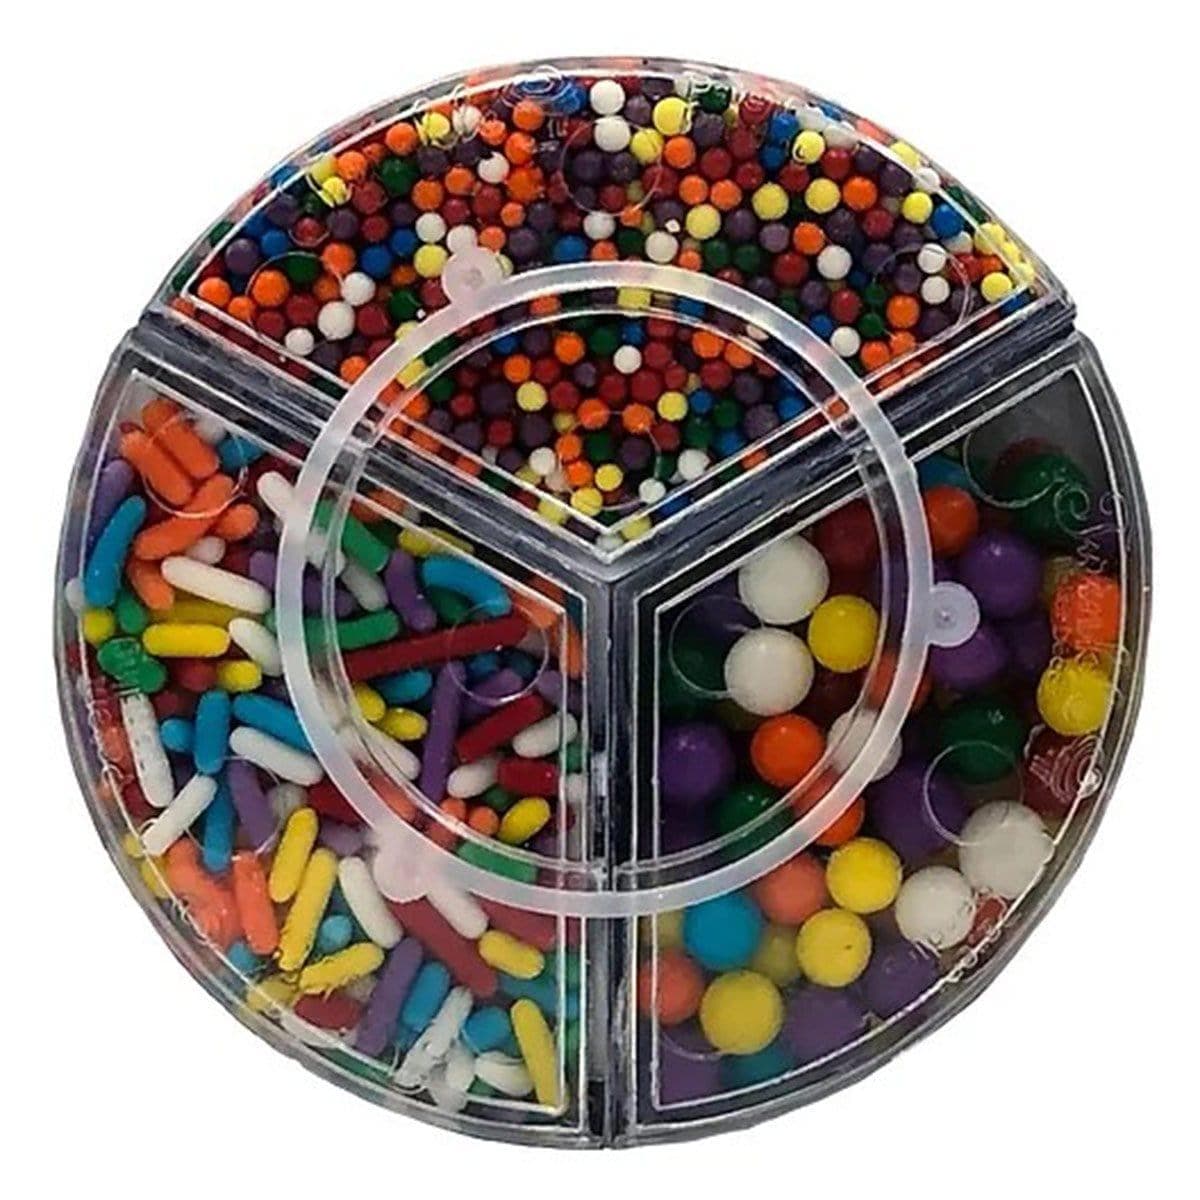 Buy Cake Supplies Candy Rainbow Triplet Sprinkles sold at Party Expert